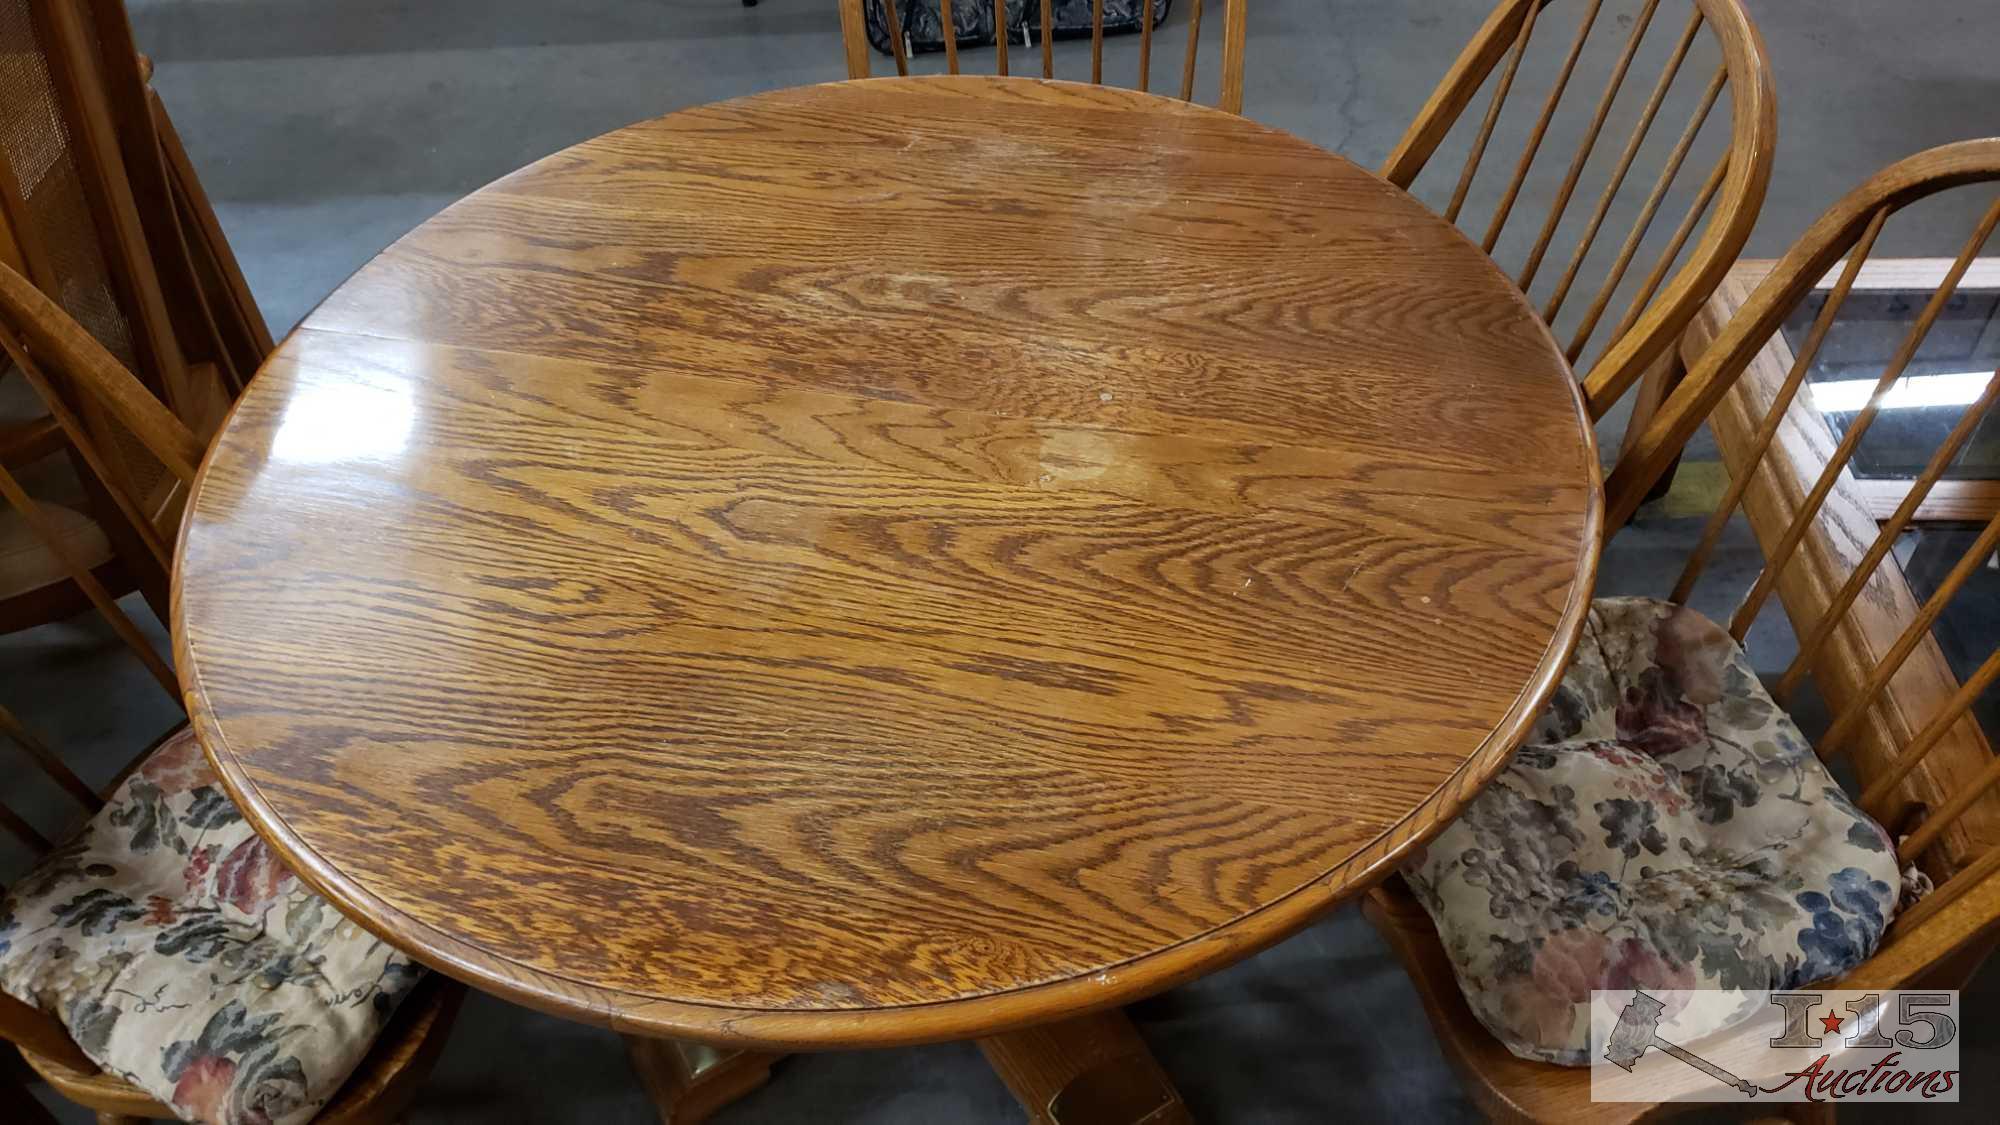 4 Thomasville Chairs and Dining Table